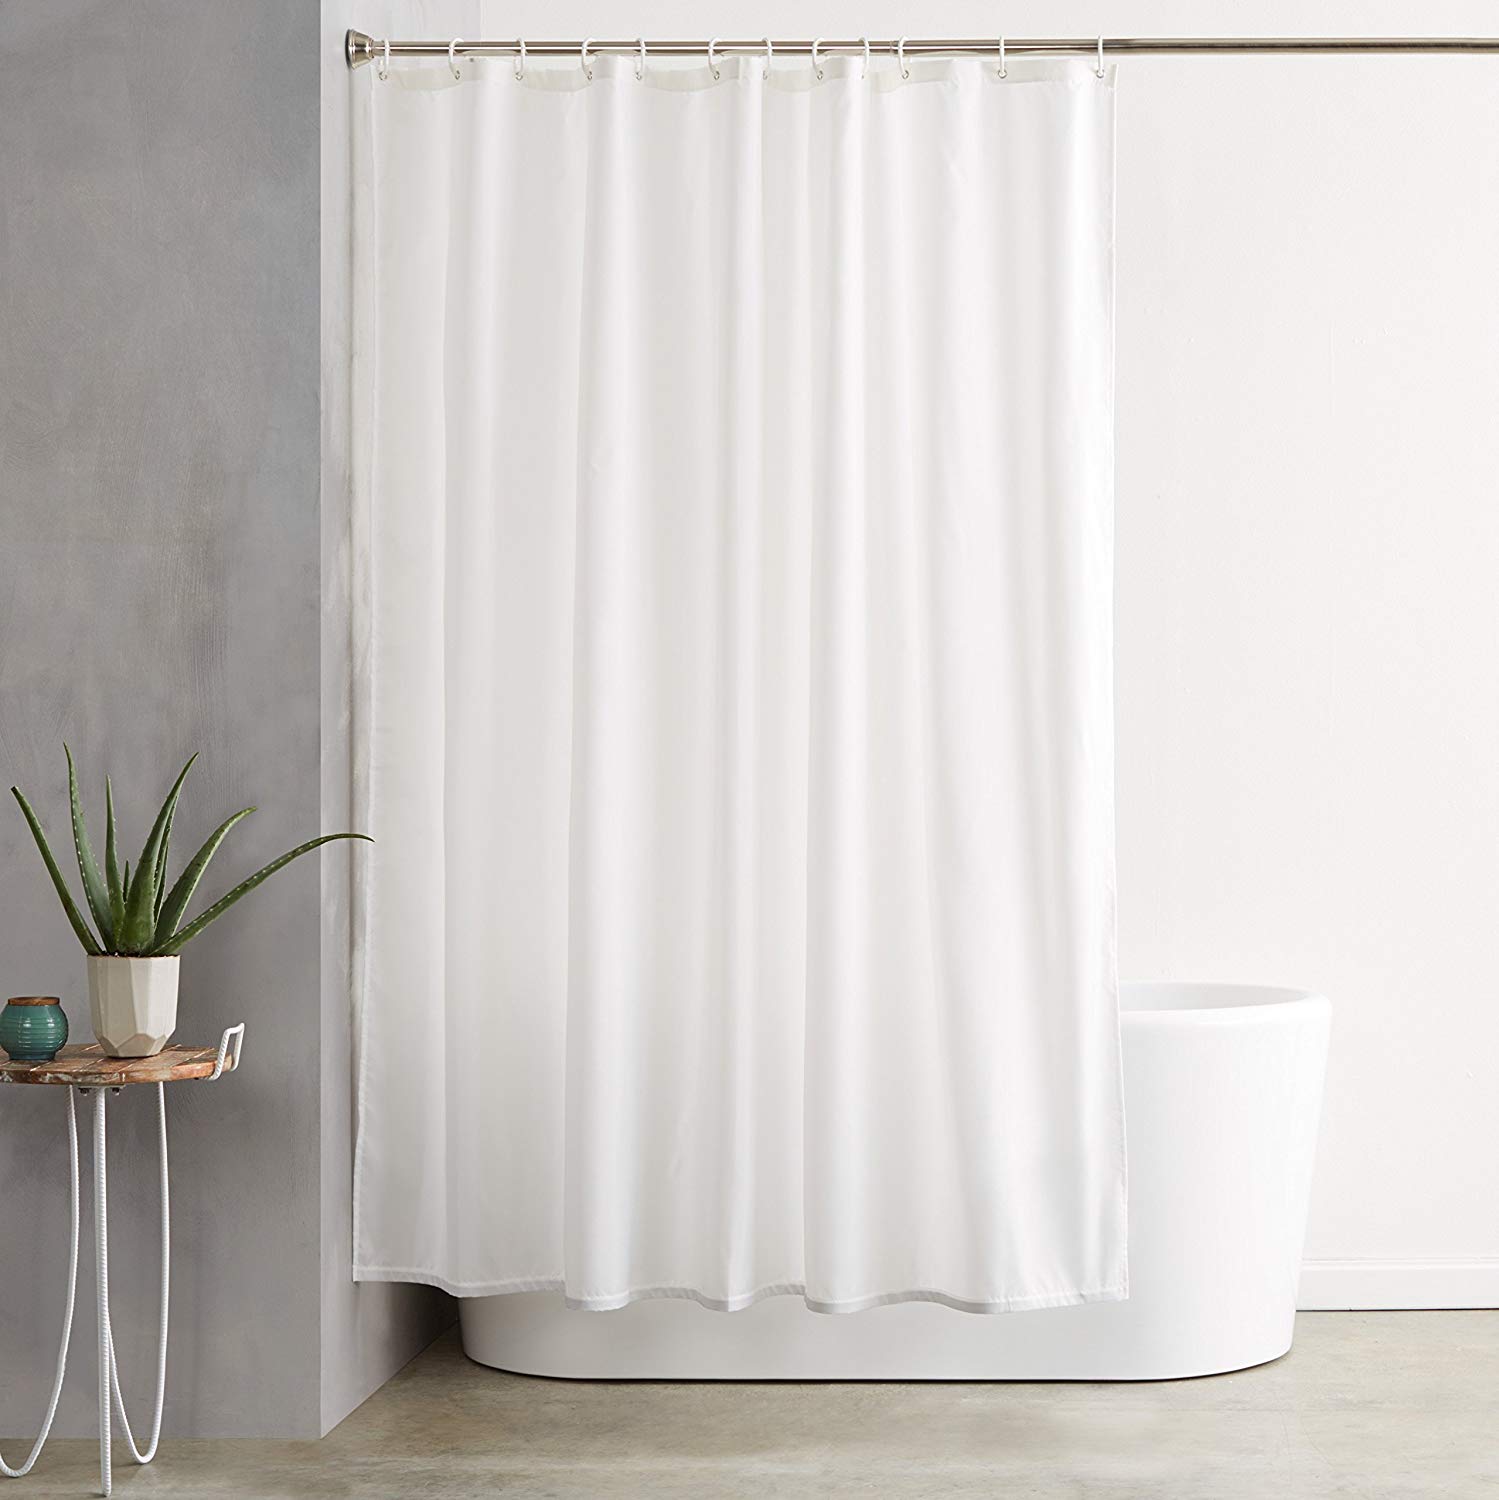 Traveller Location: AmazonBasics Shower Curtain with Hooks (Treated to Resist  Deterioration by Mildew) - 72 x 72 inches, White: Home & Kitchen